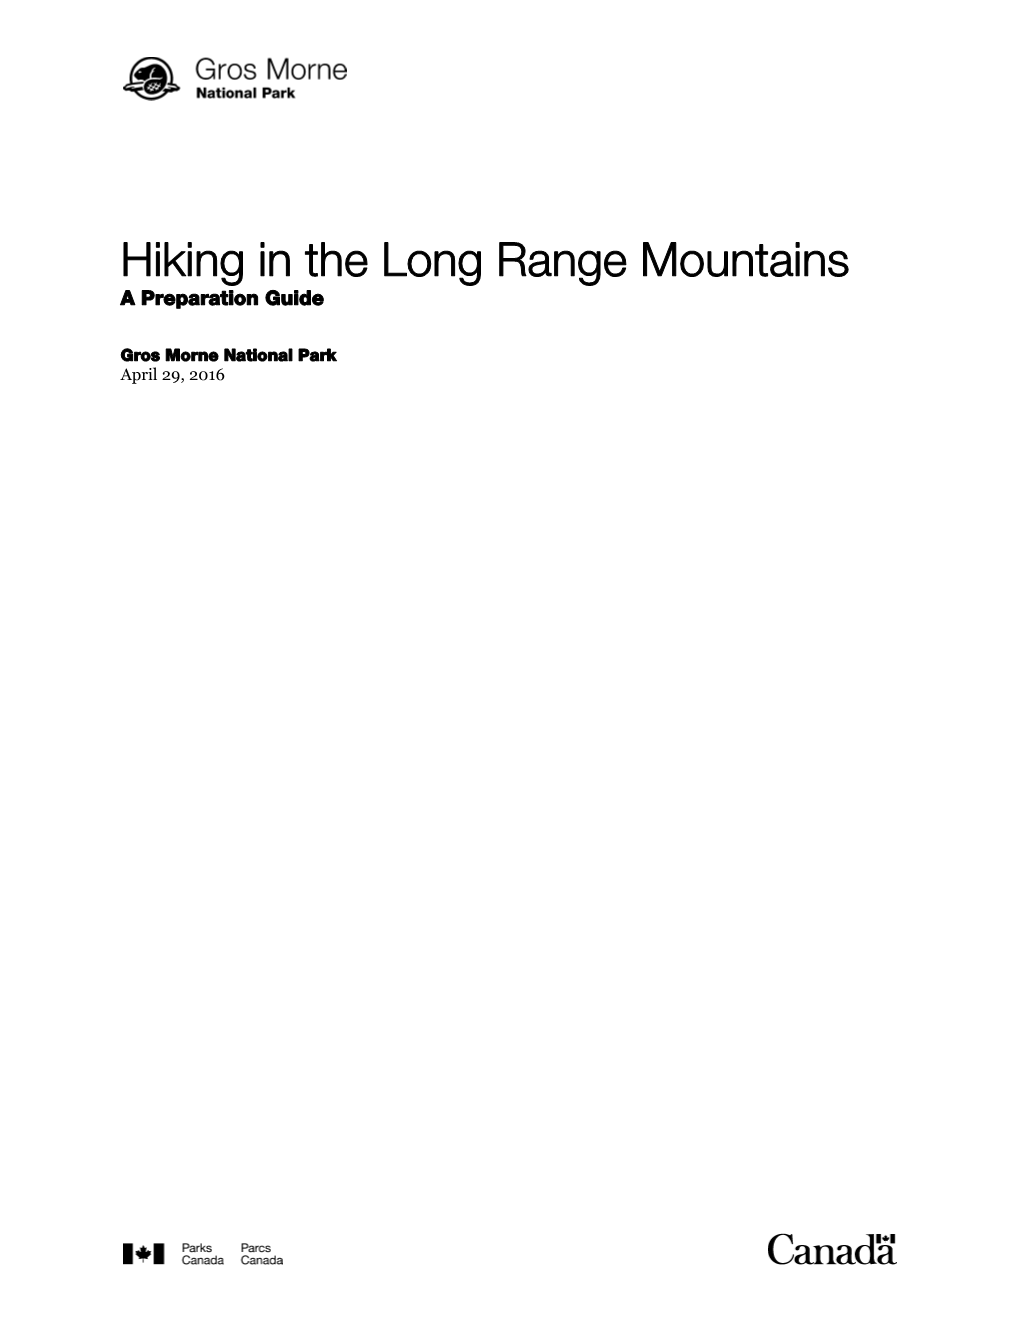 Hiking in the Long Range Mountains – a Preparation Guide (2016)